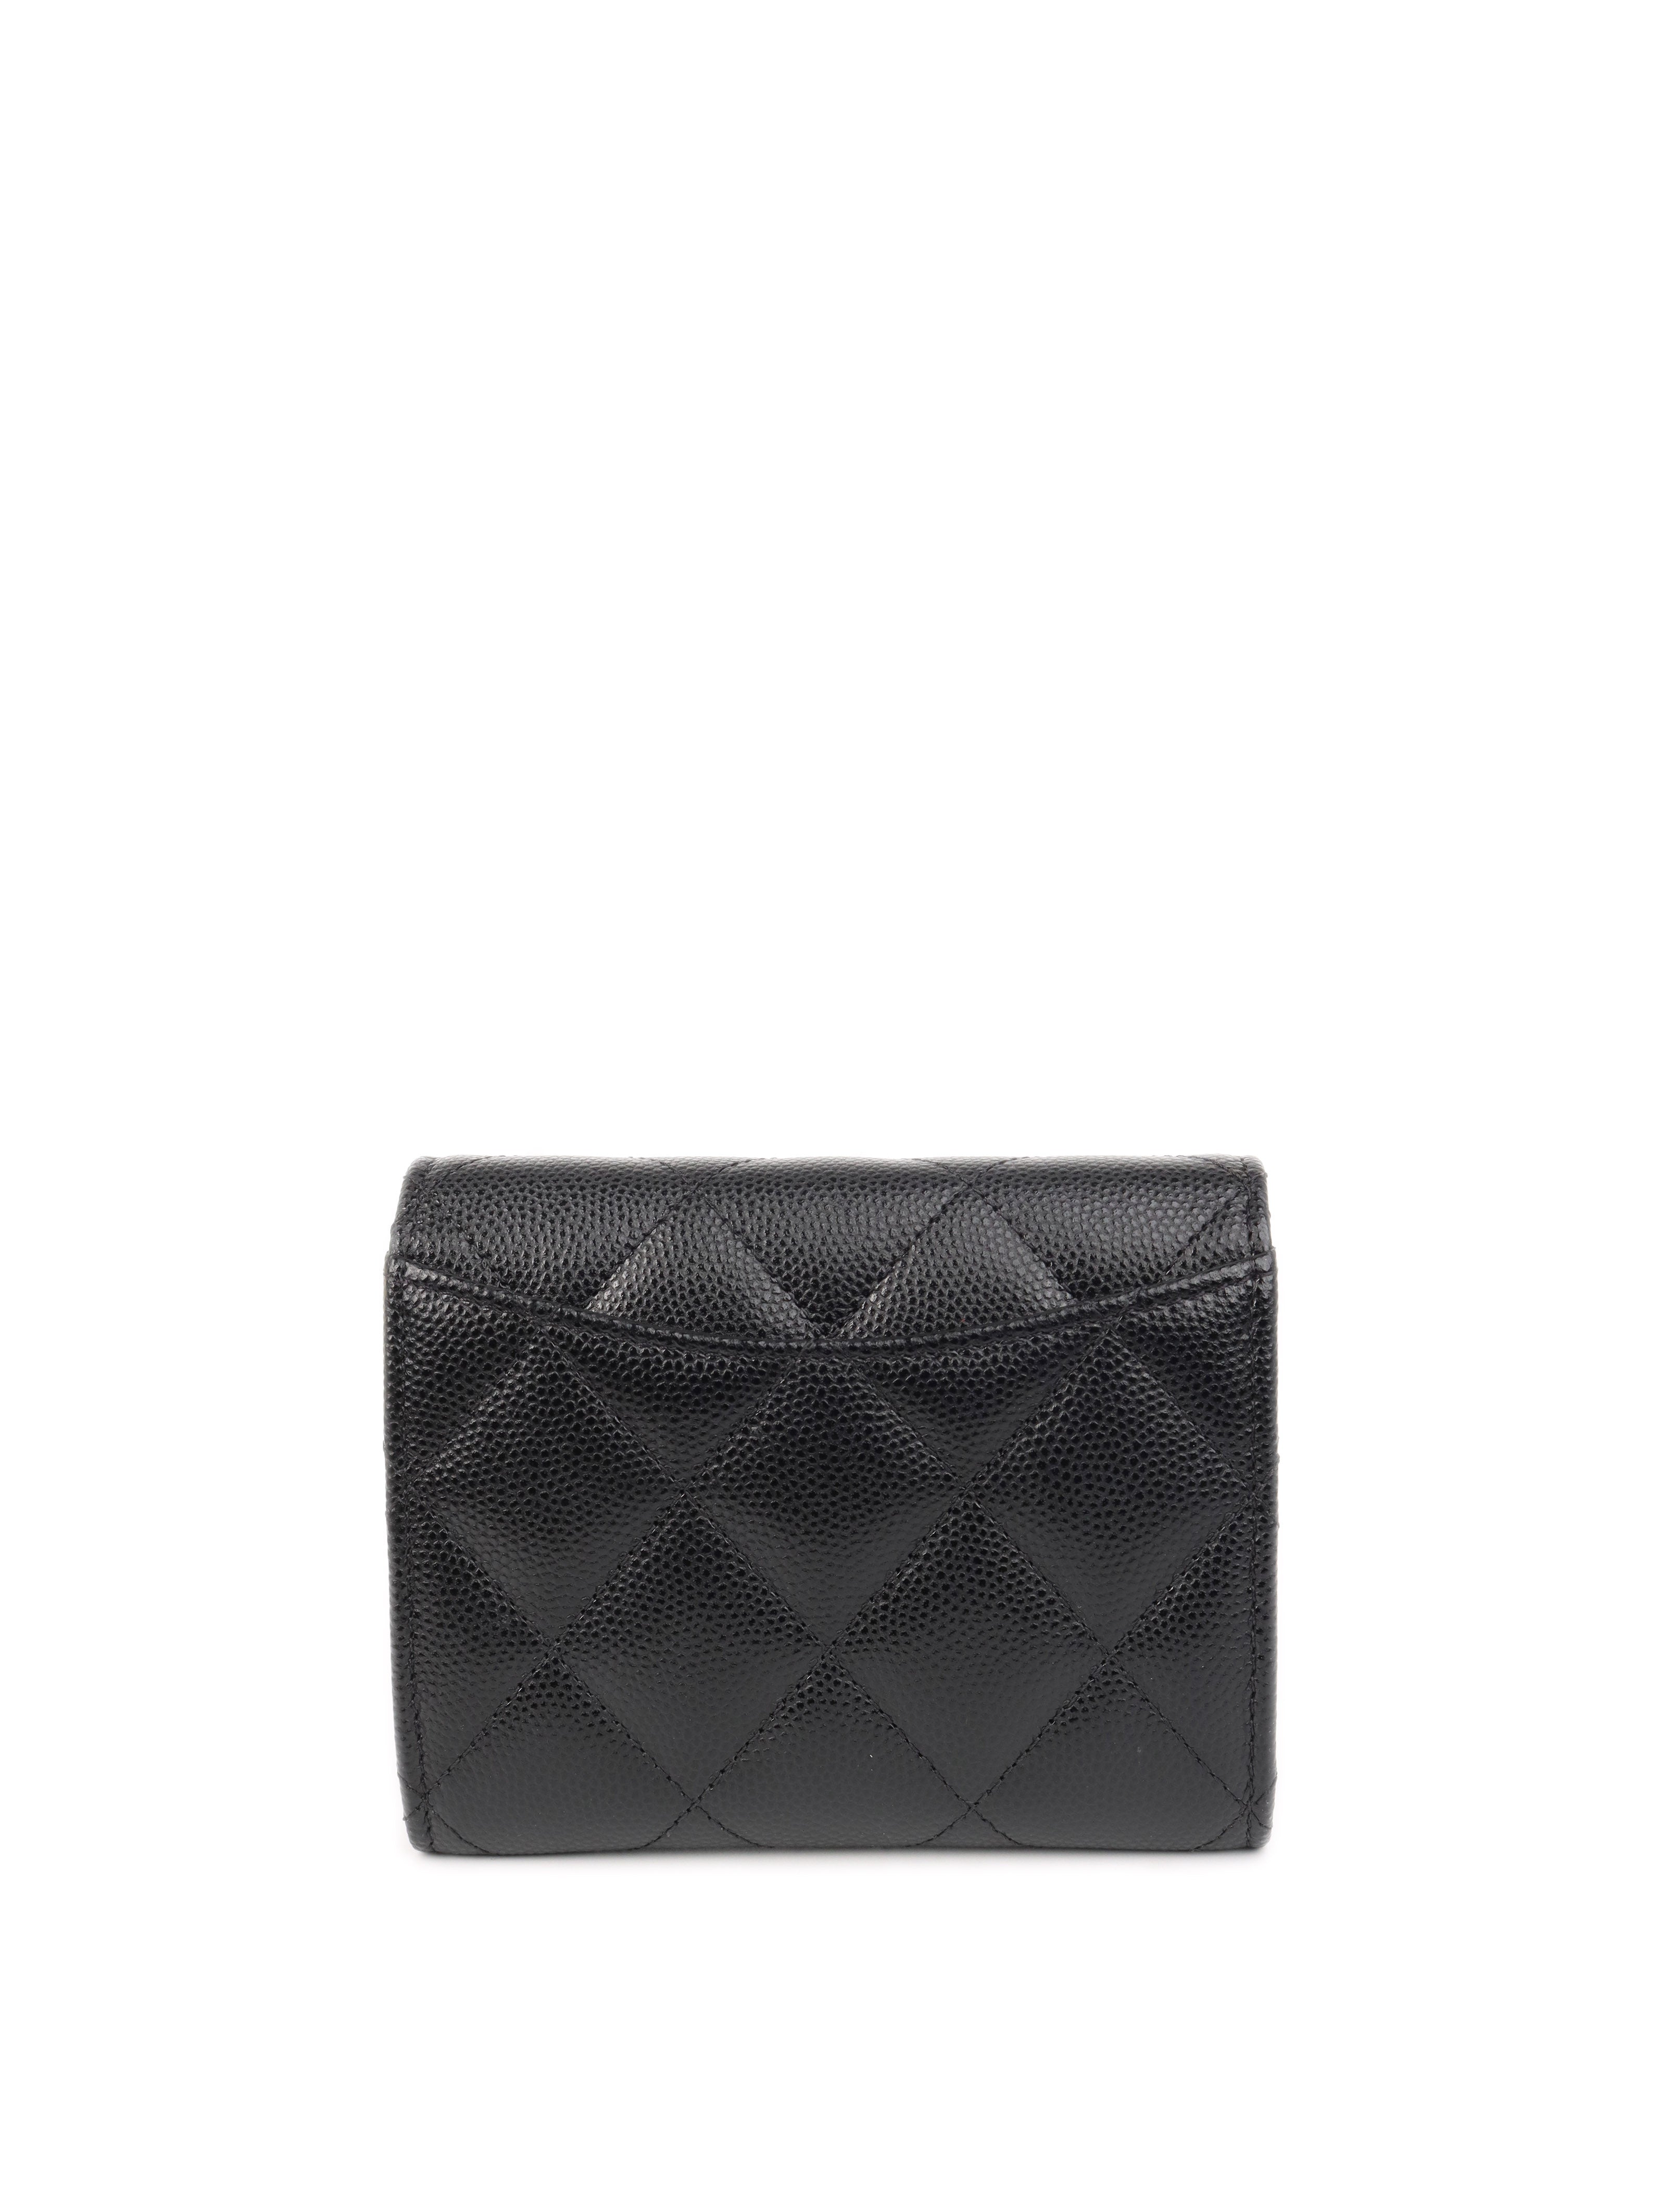 Chanel Black Caviar Card Holder with Chain – Votre Luxe